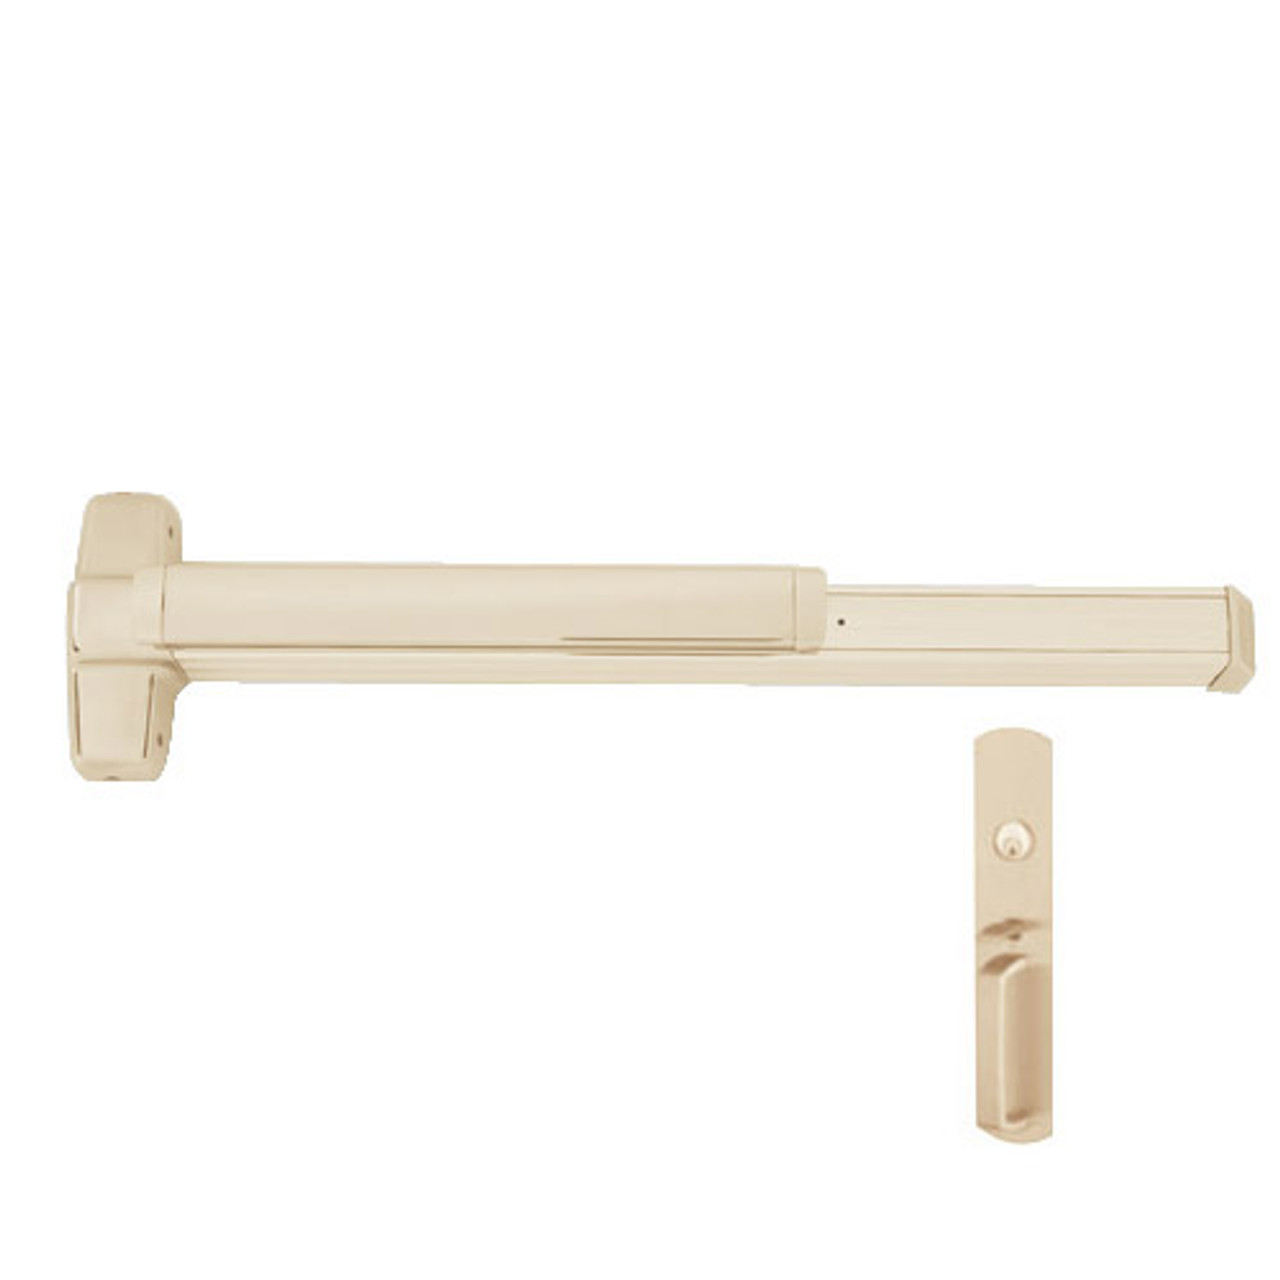 EL9847WDC-TP-US4-4 Von Duprin Exit Device with Electric Latch Retraction in Satin Brass